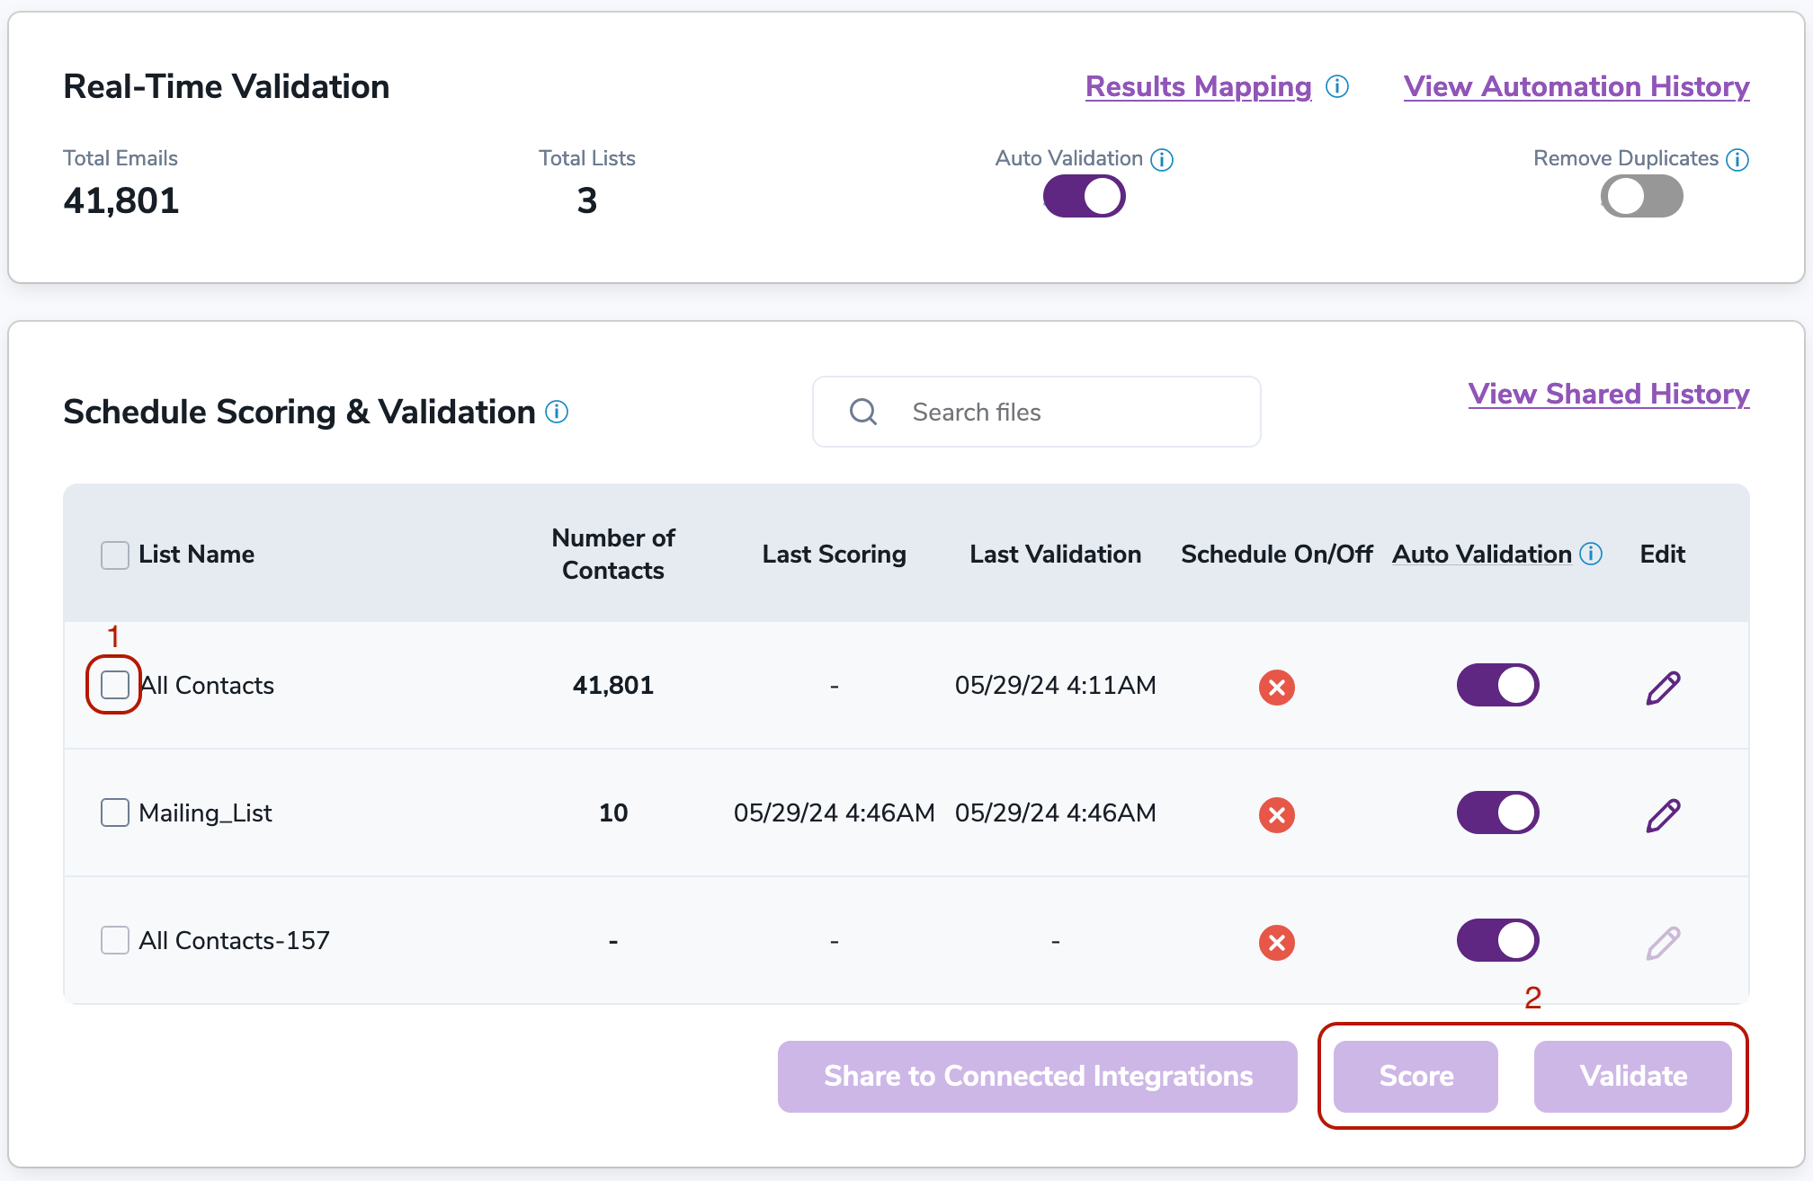 After successful integration, you will be able to view your lists in your ZeroBounce Dashboard.